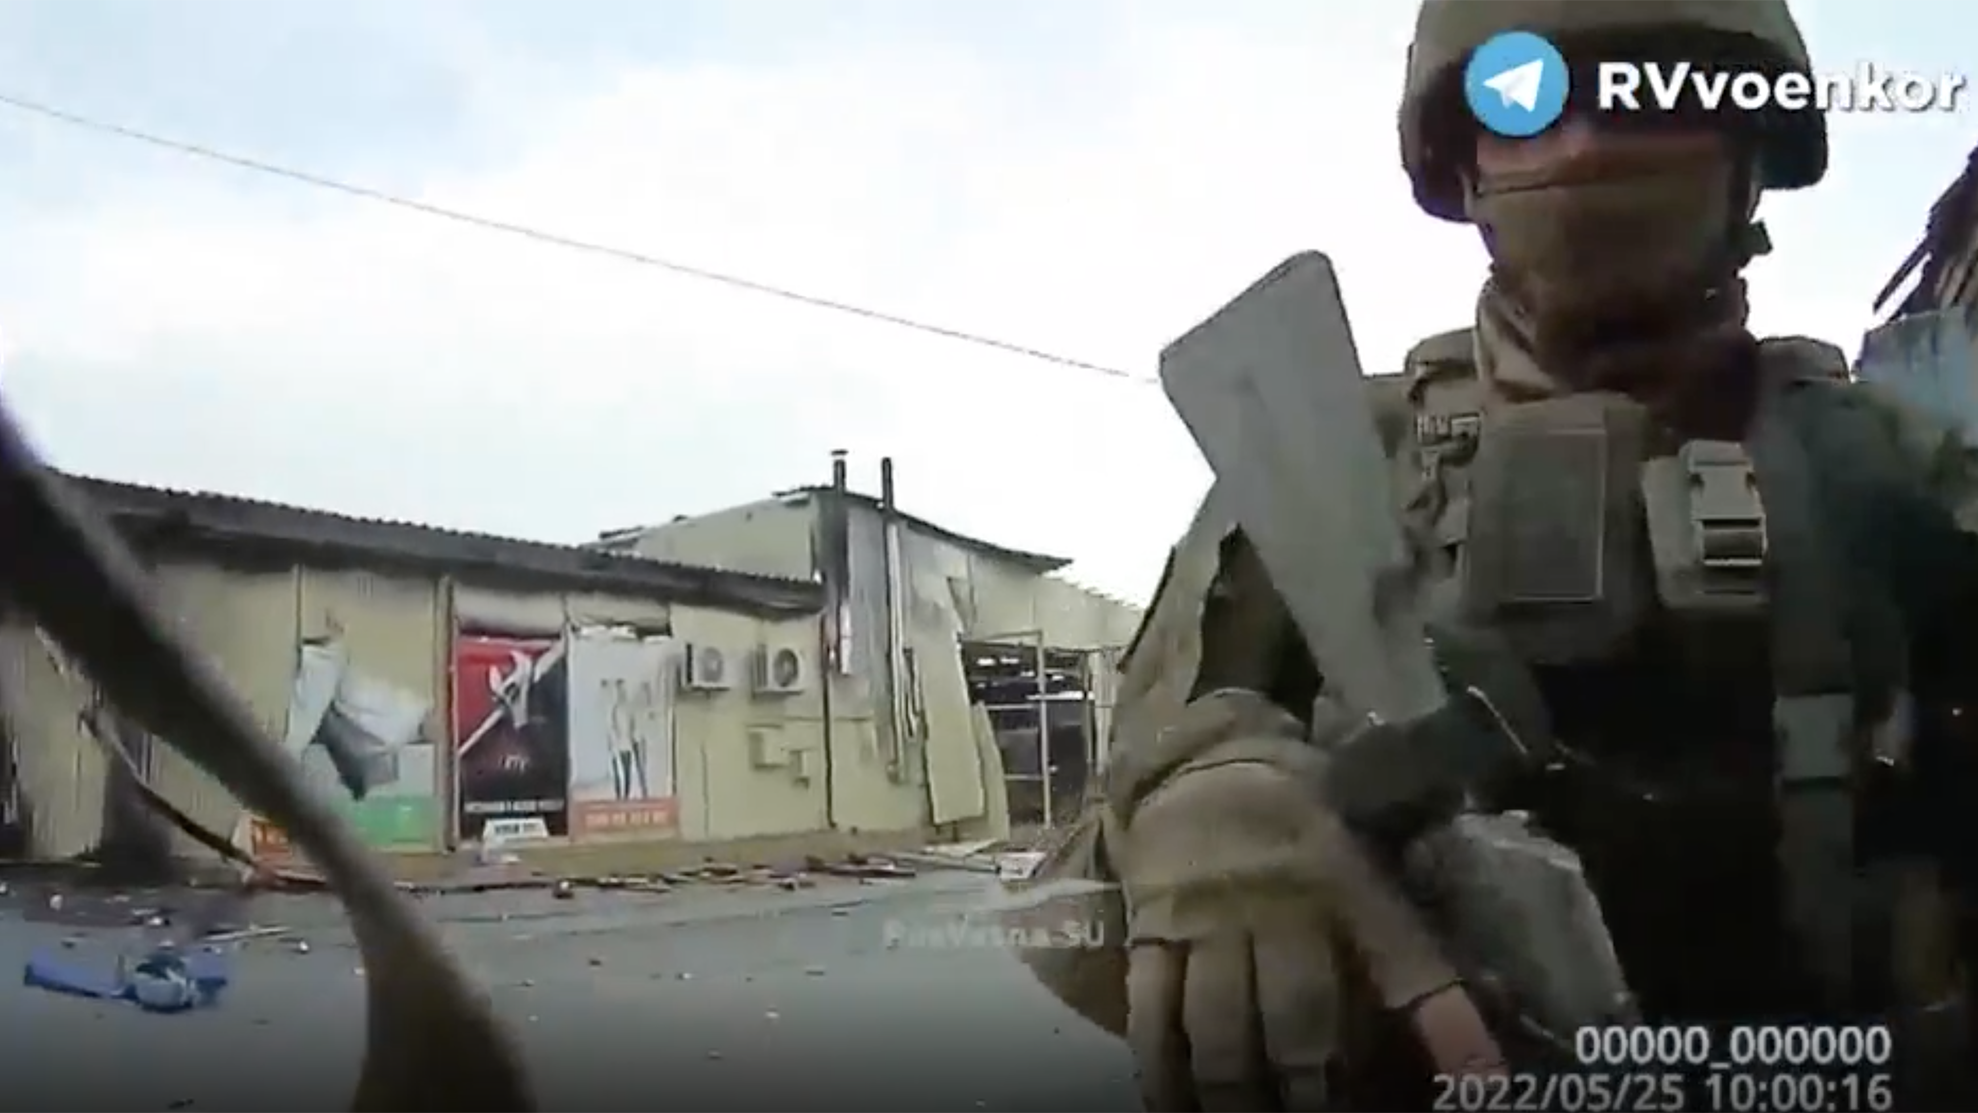 Bodycam footage filmed by a soldier called "Rusak" on May 25 shows the incredible devastation all around the city of Lyman, Ukraine, as Russian troops move past destroyed buildings and down empty streets.